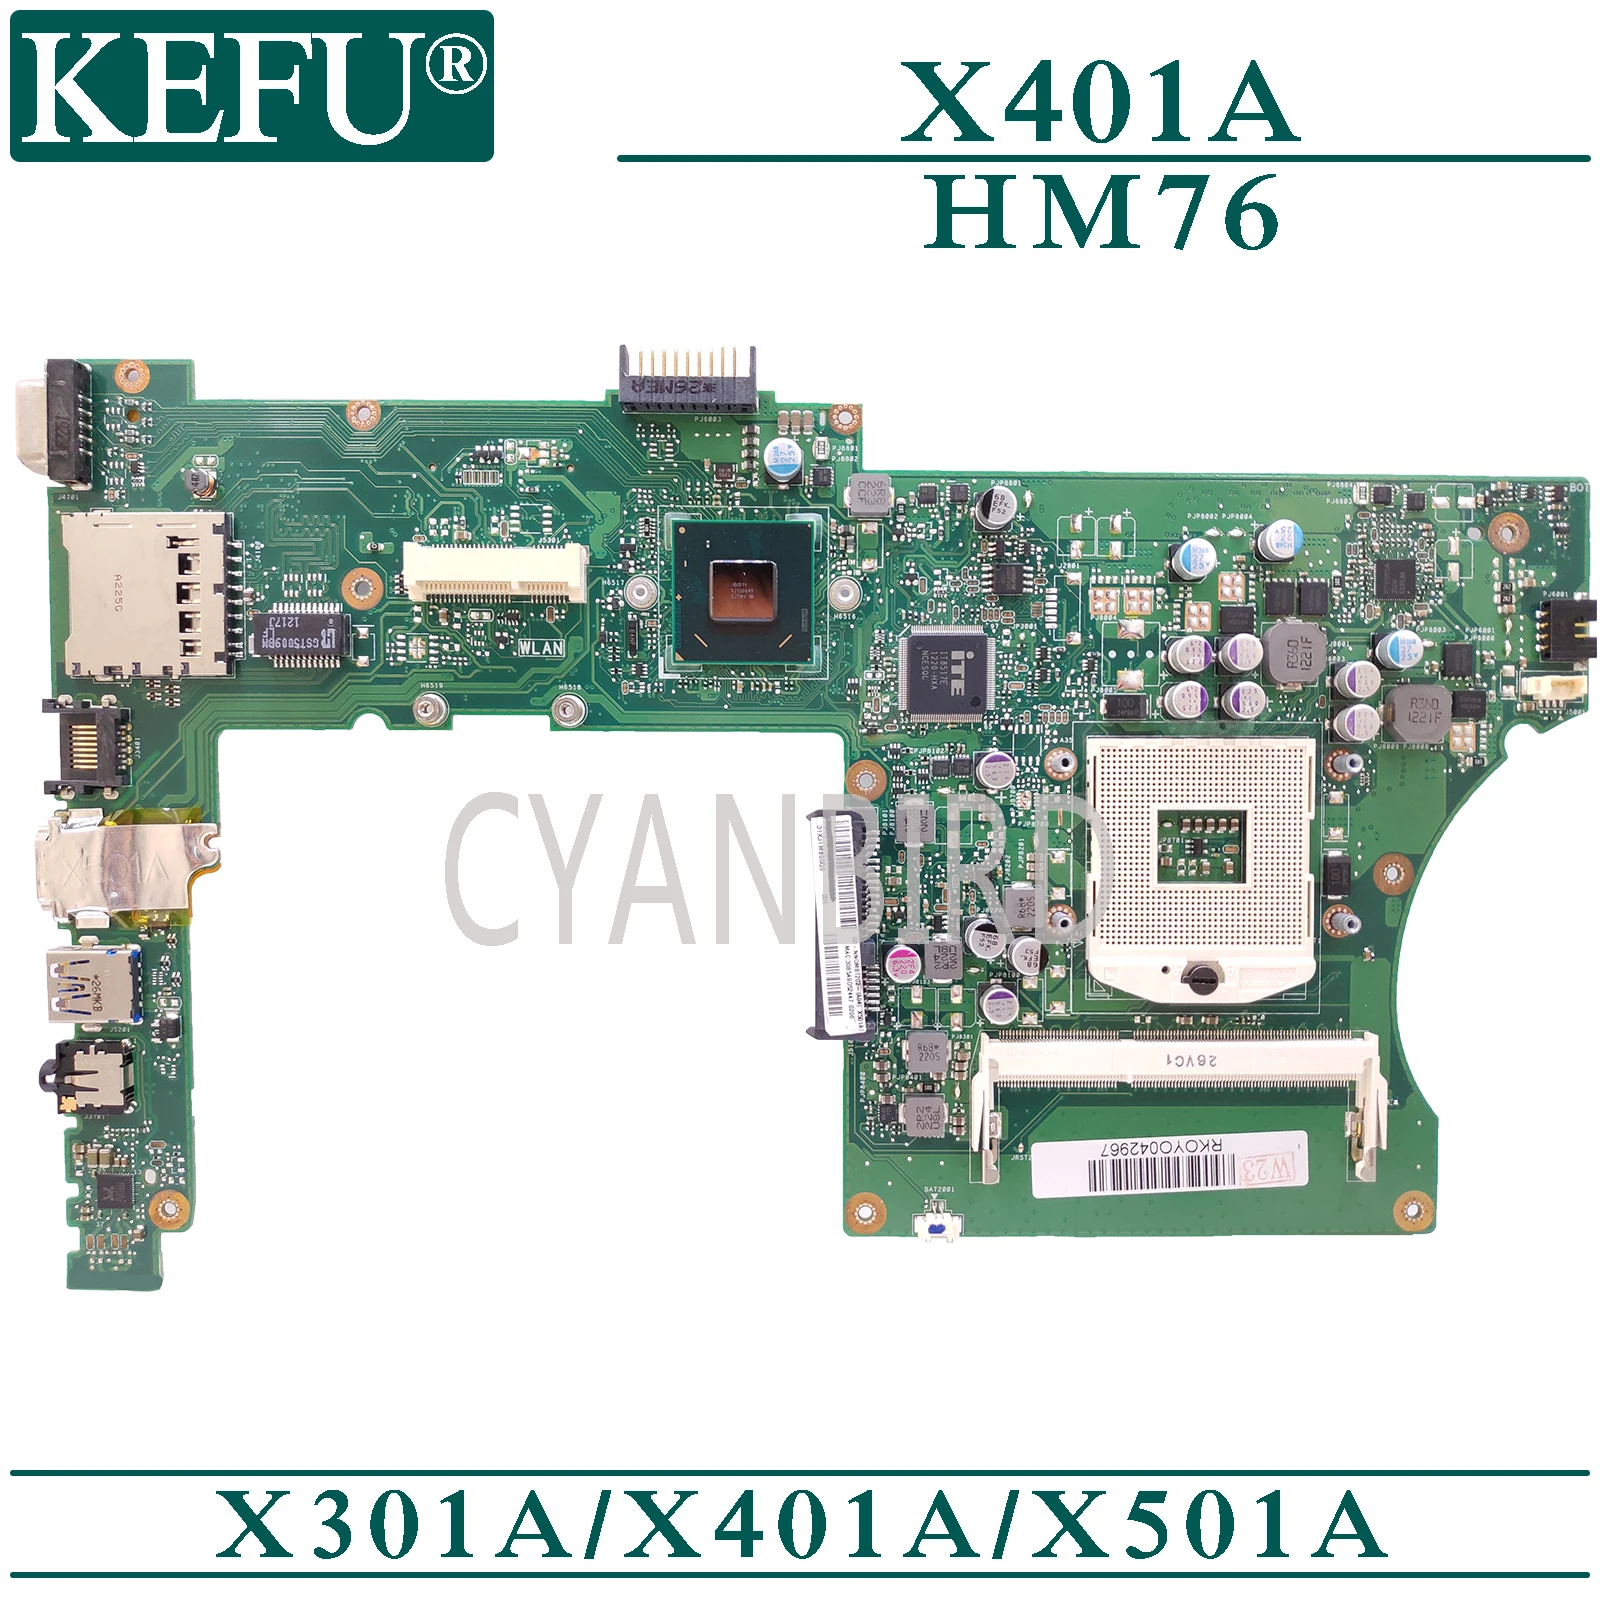 KEFU X401A original mainboard for ASUS X301A X501A HM76 Laptop motherboard